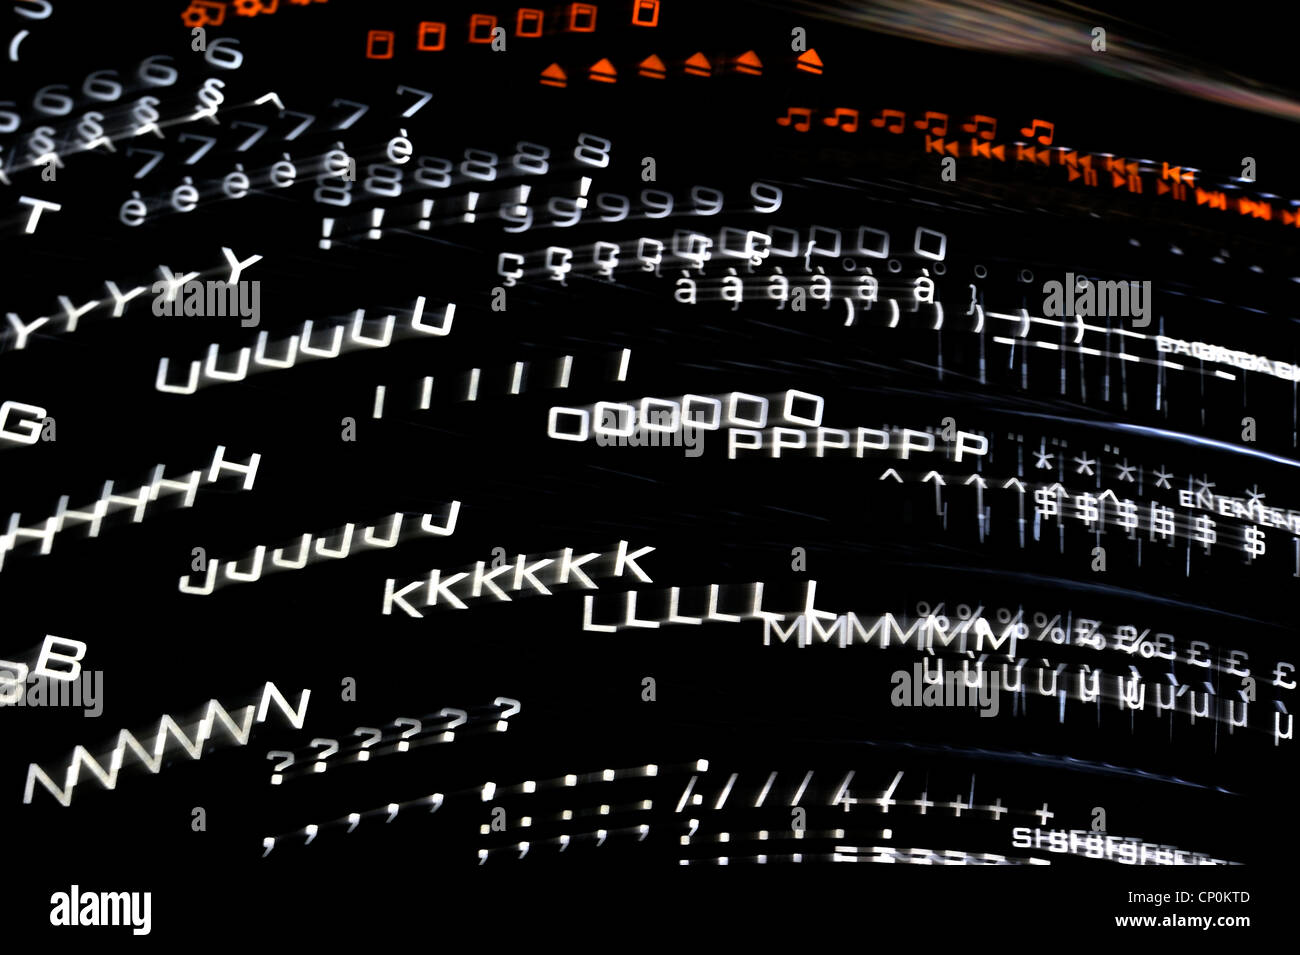 Abstract technology image showing black computer keyboard with illuminated backlit white letters on keys Stock Photo